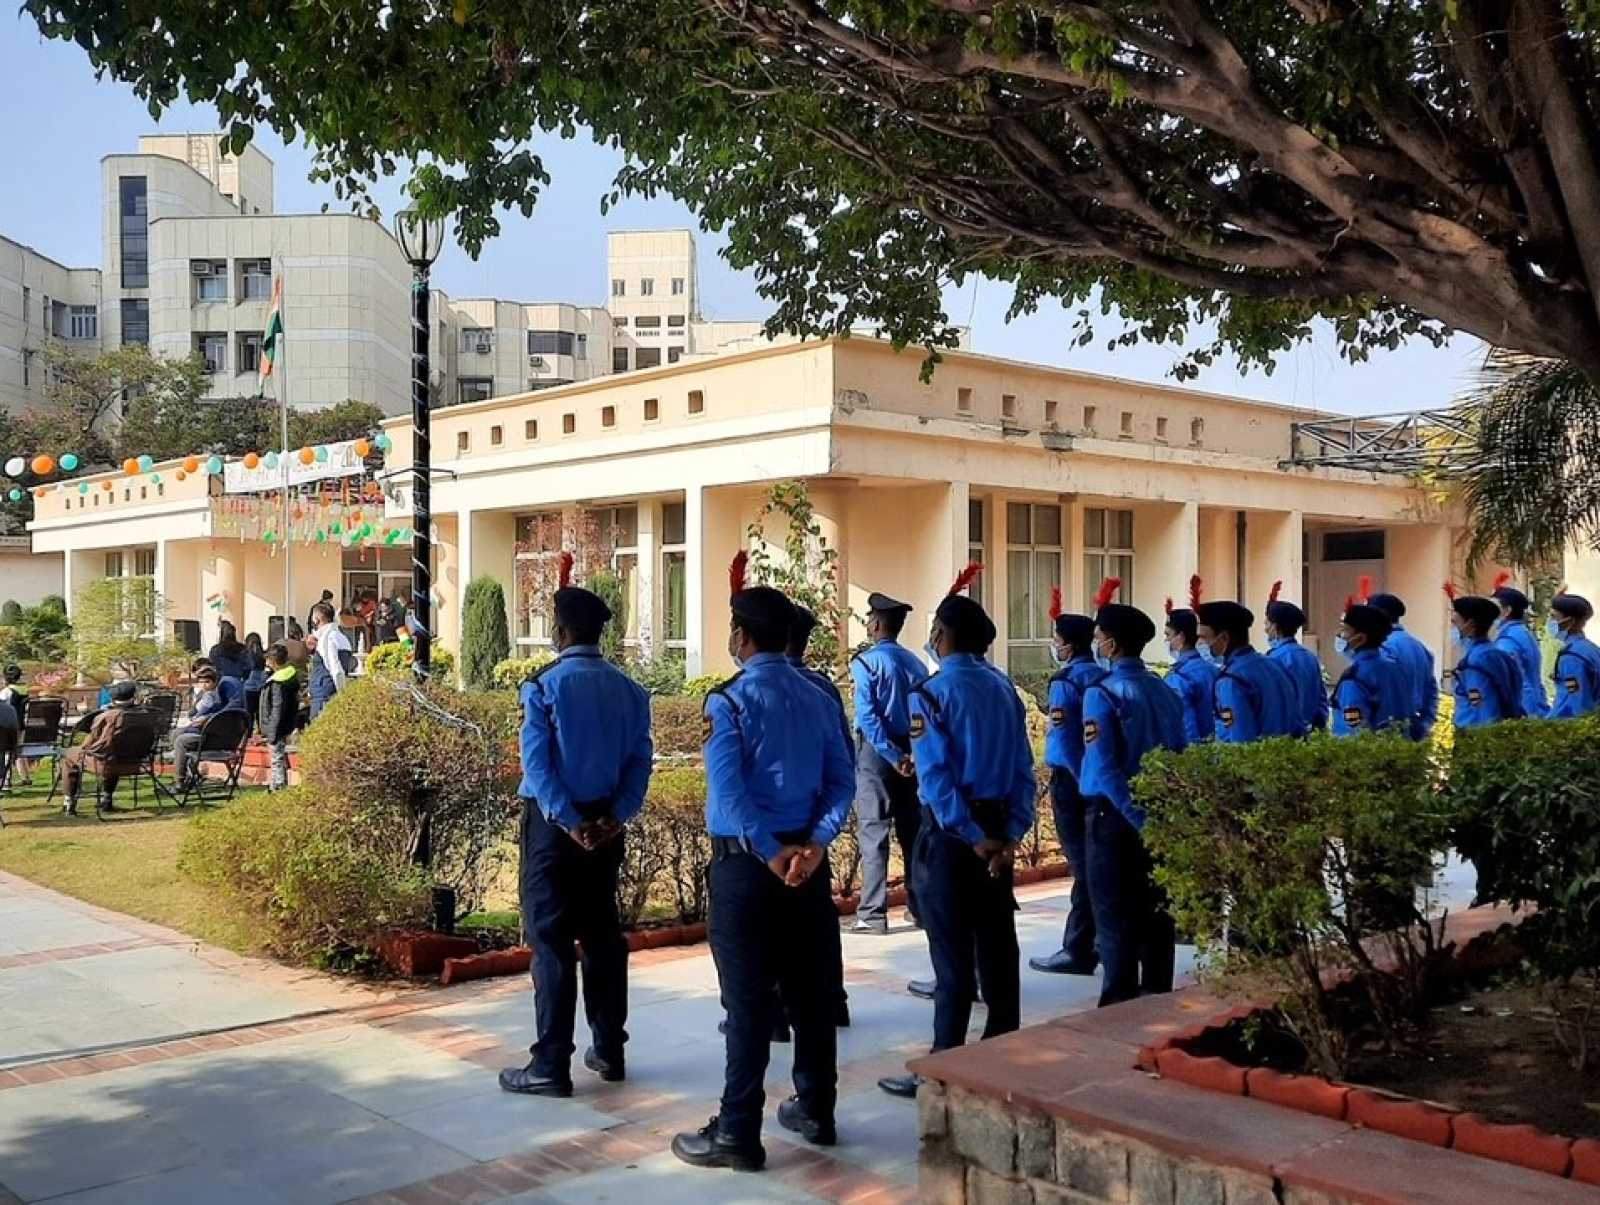 Indian security guards in bright blue uniforms lined up outside a public building